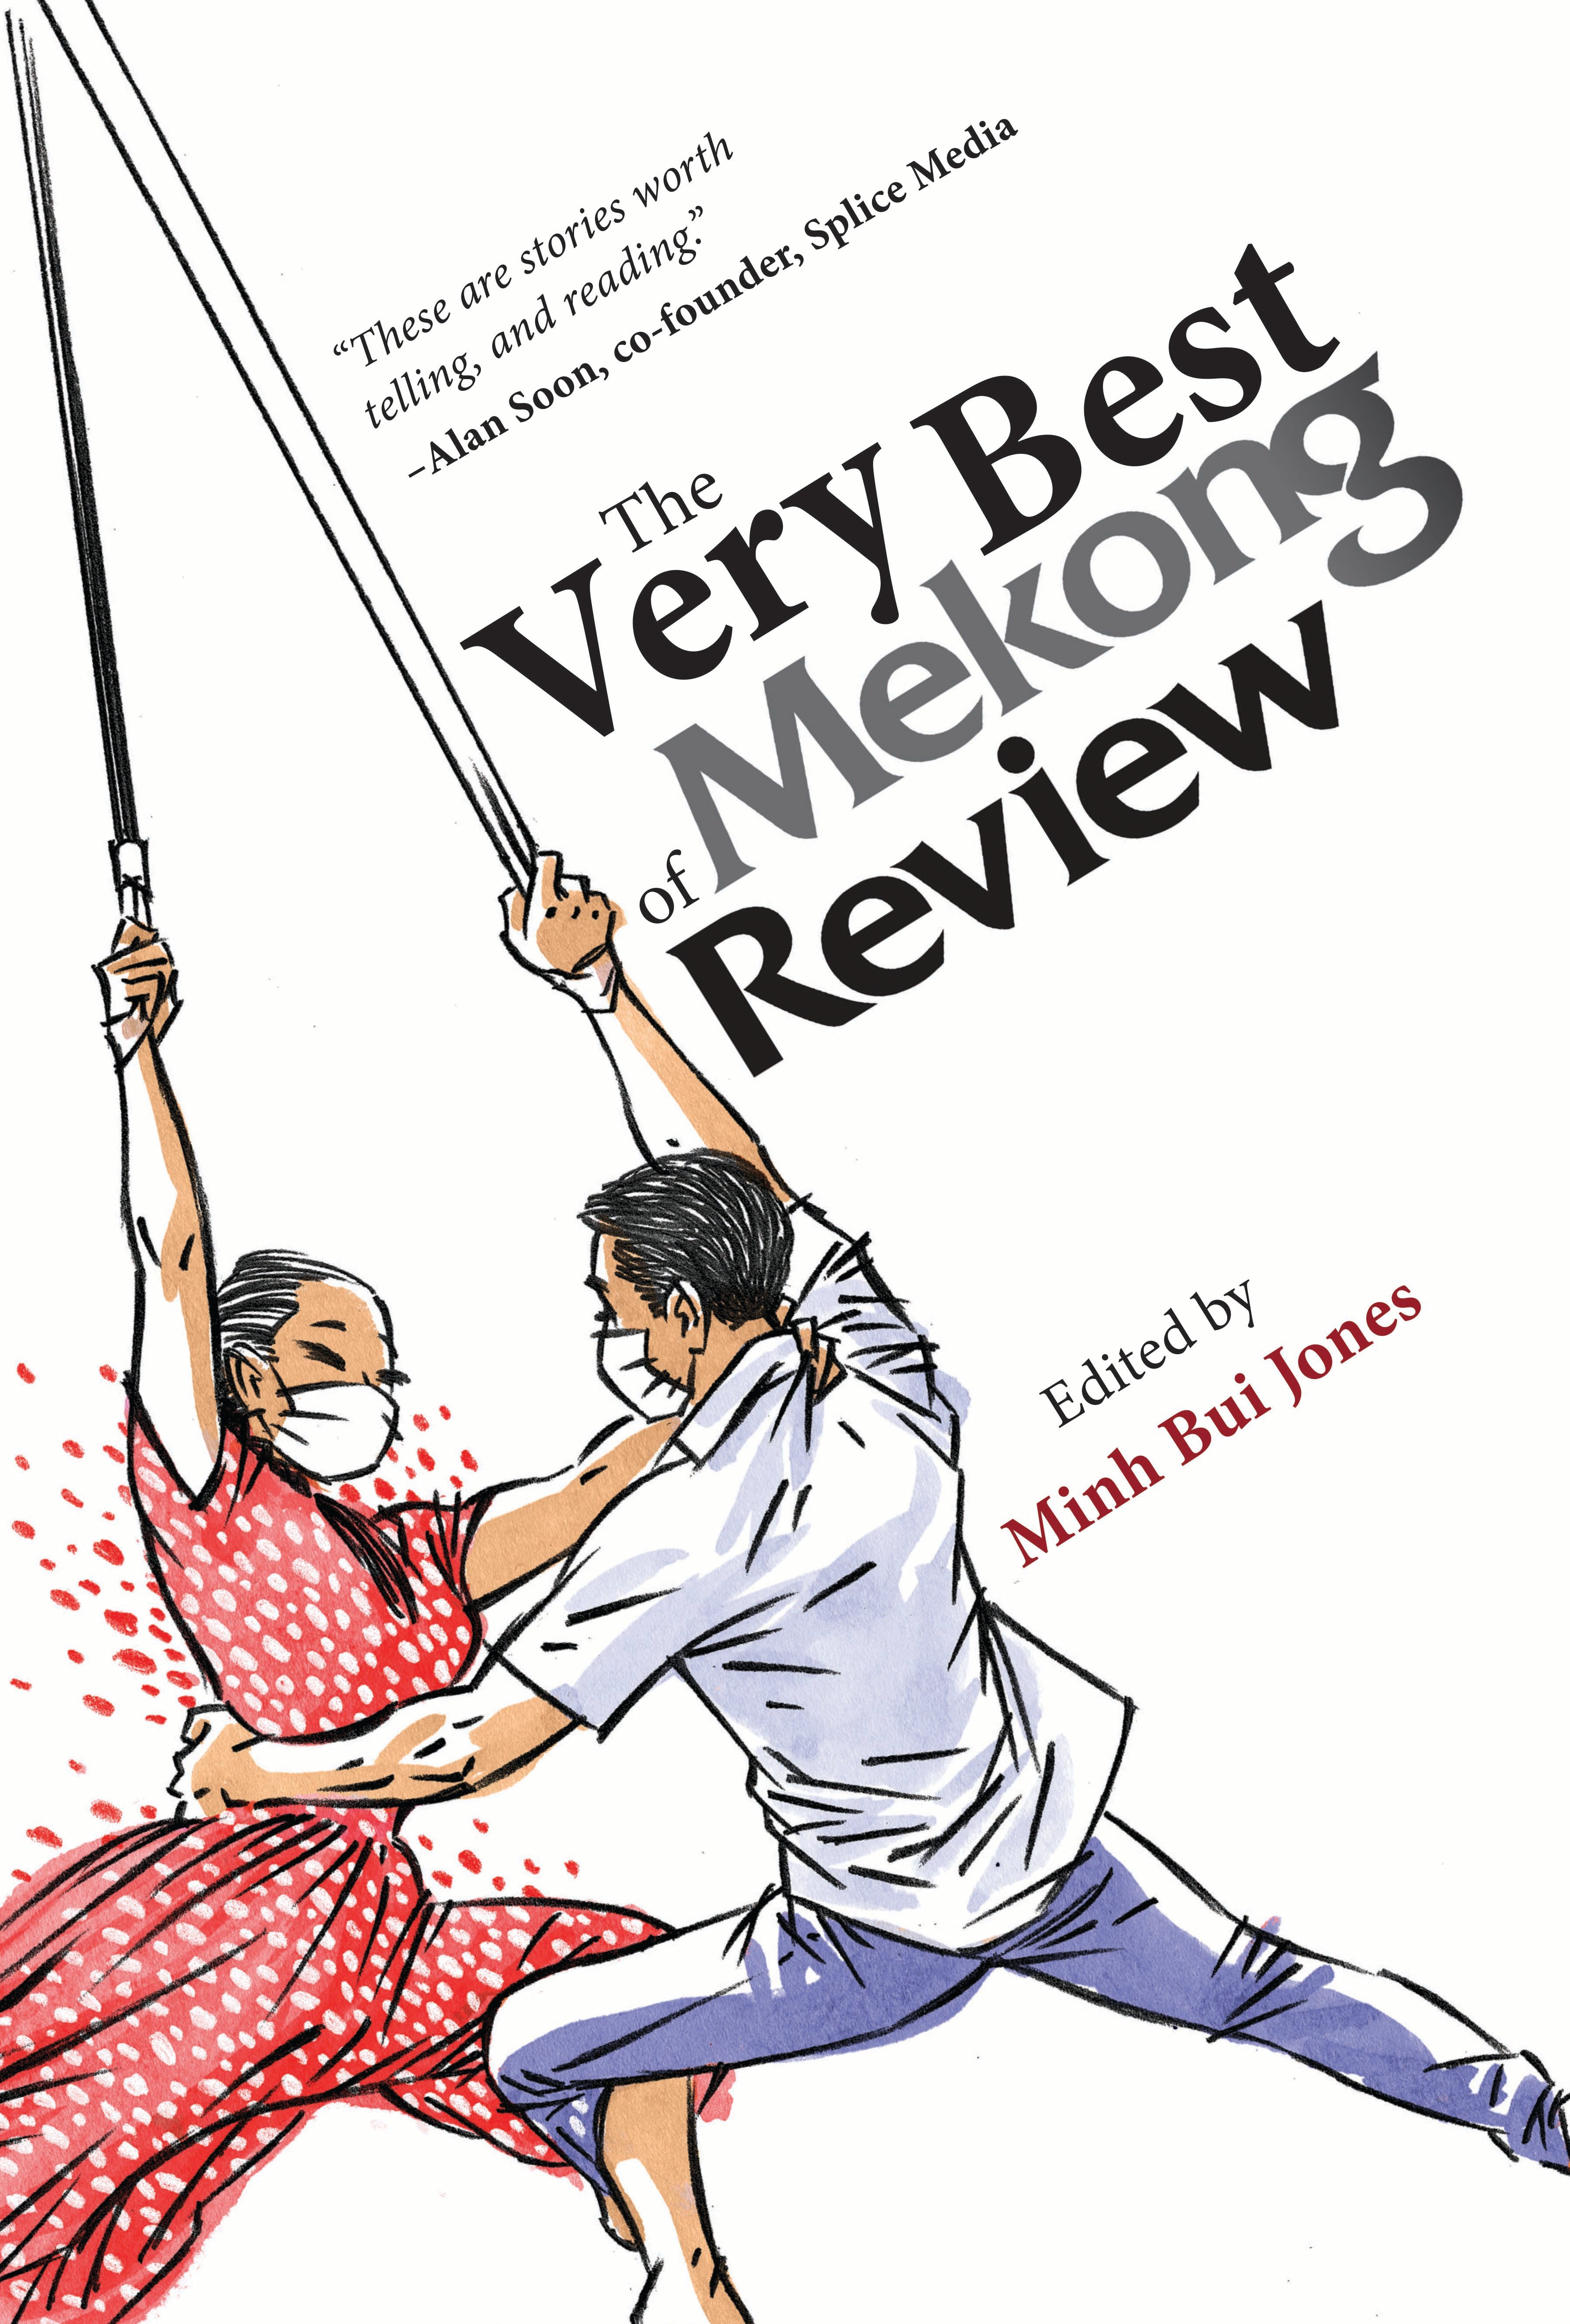 The Very Best of Mekong Review